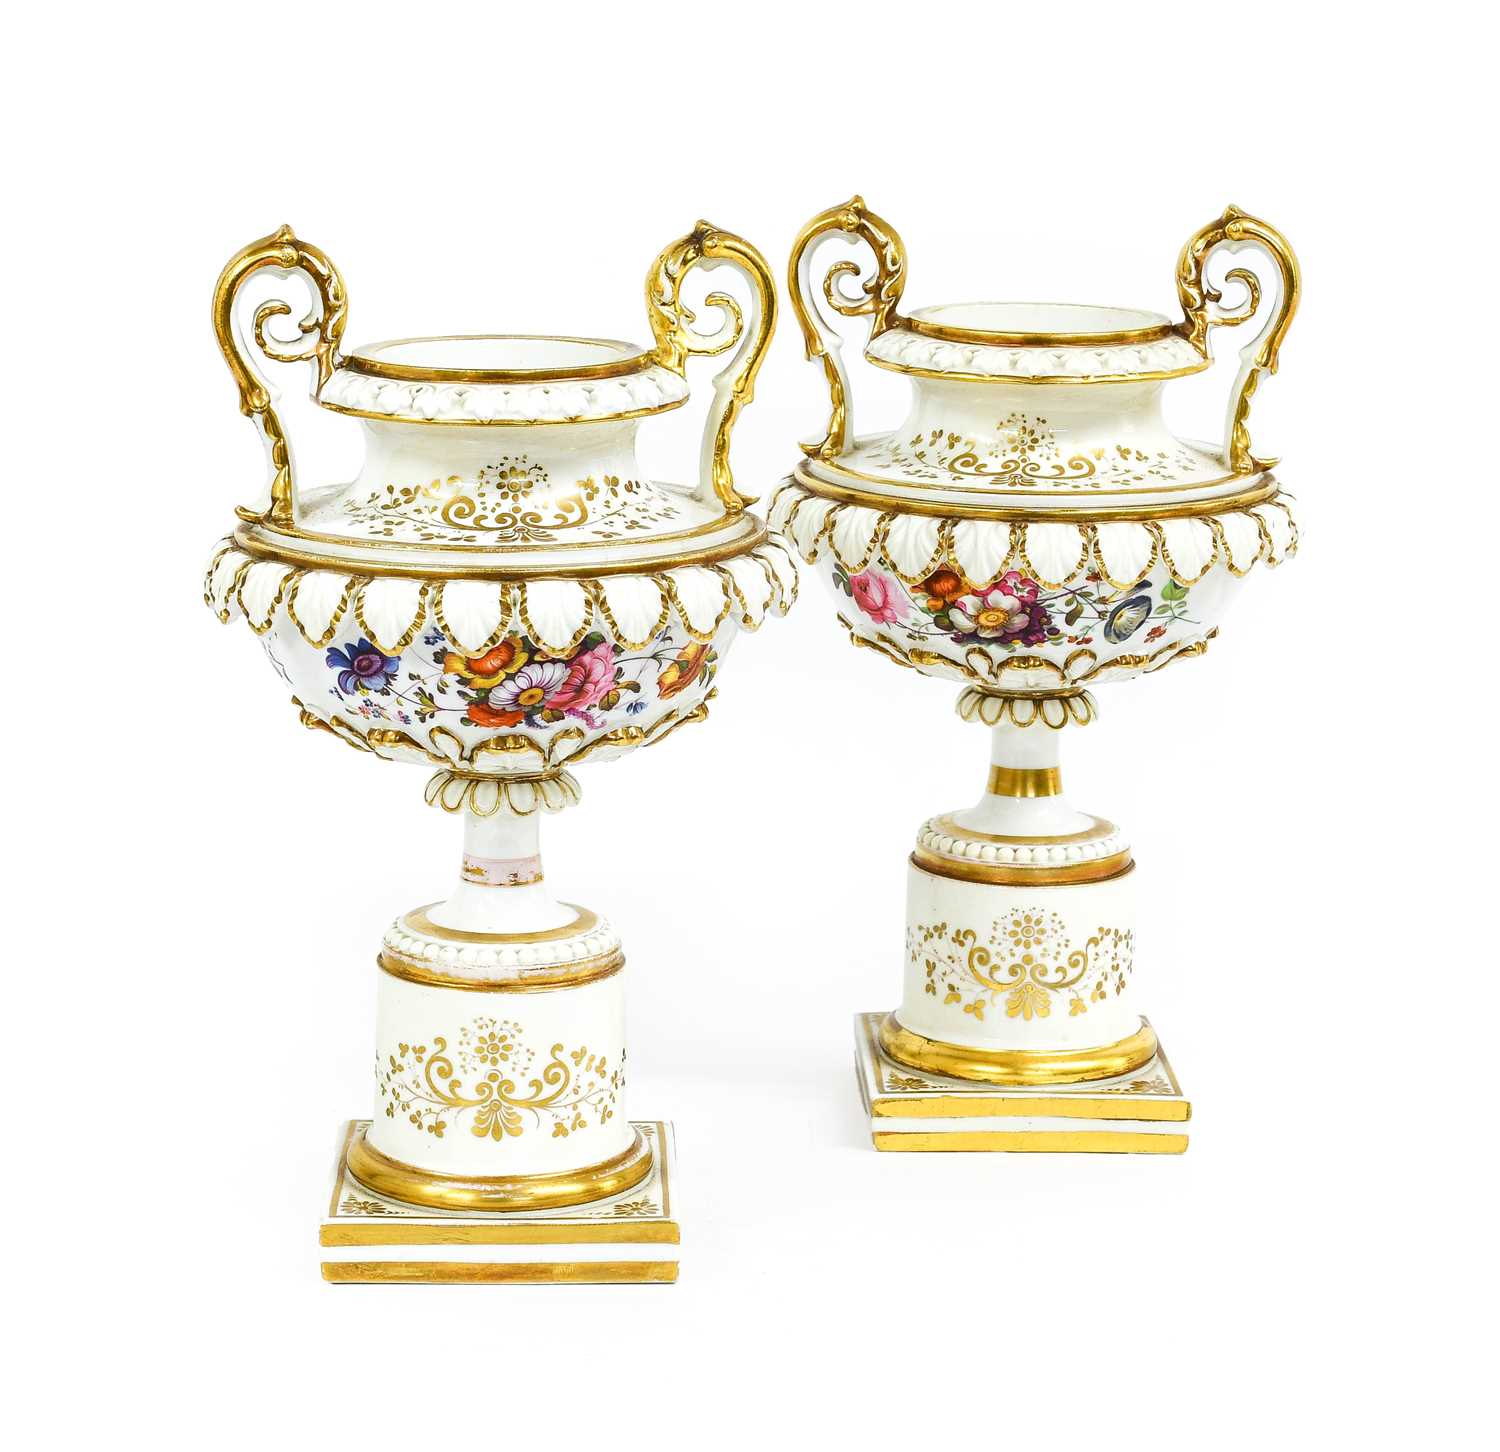 A Pair of English Porcelain Vases, circa 1830, possibly Ridgeway, of twin handled pedestal form,